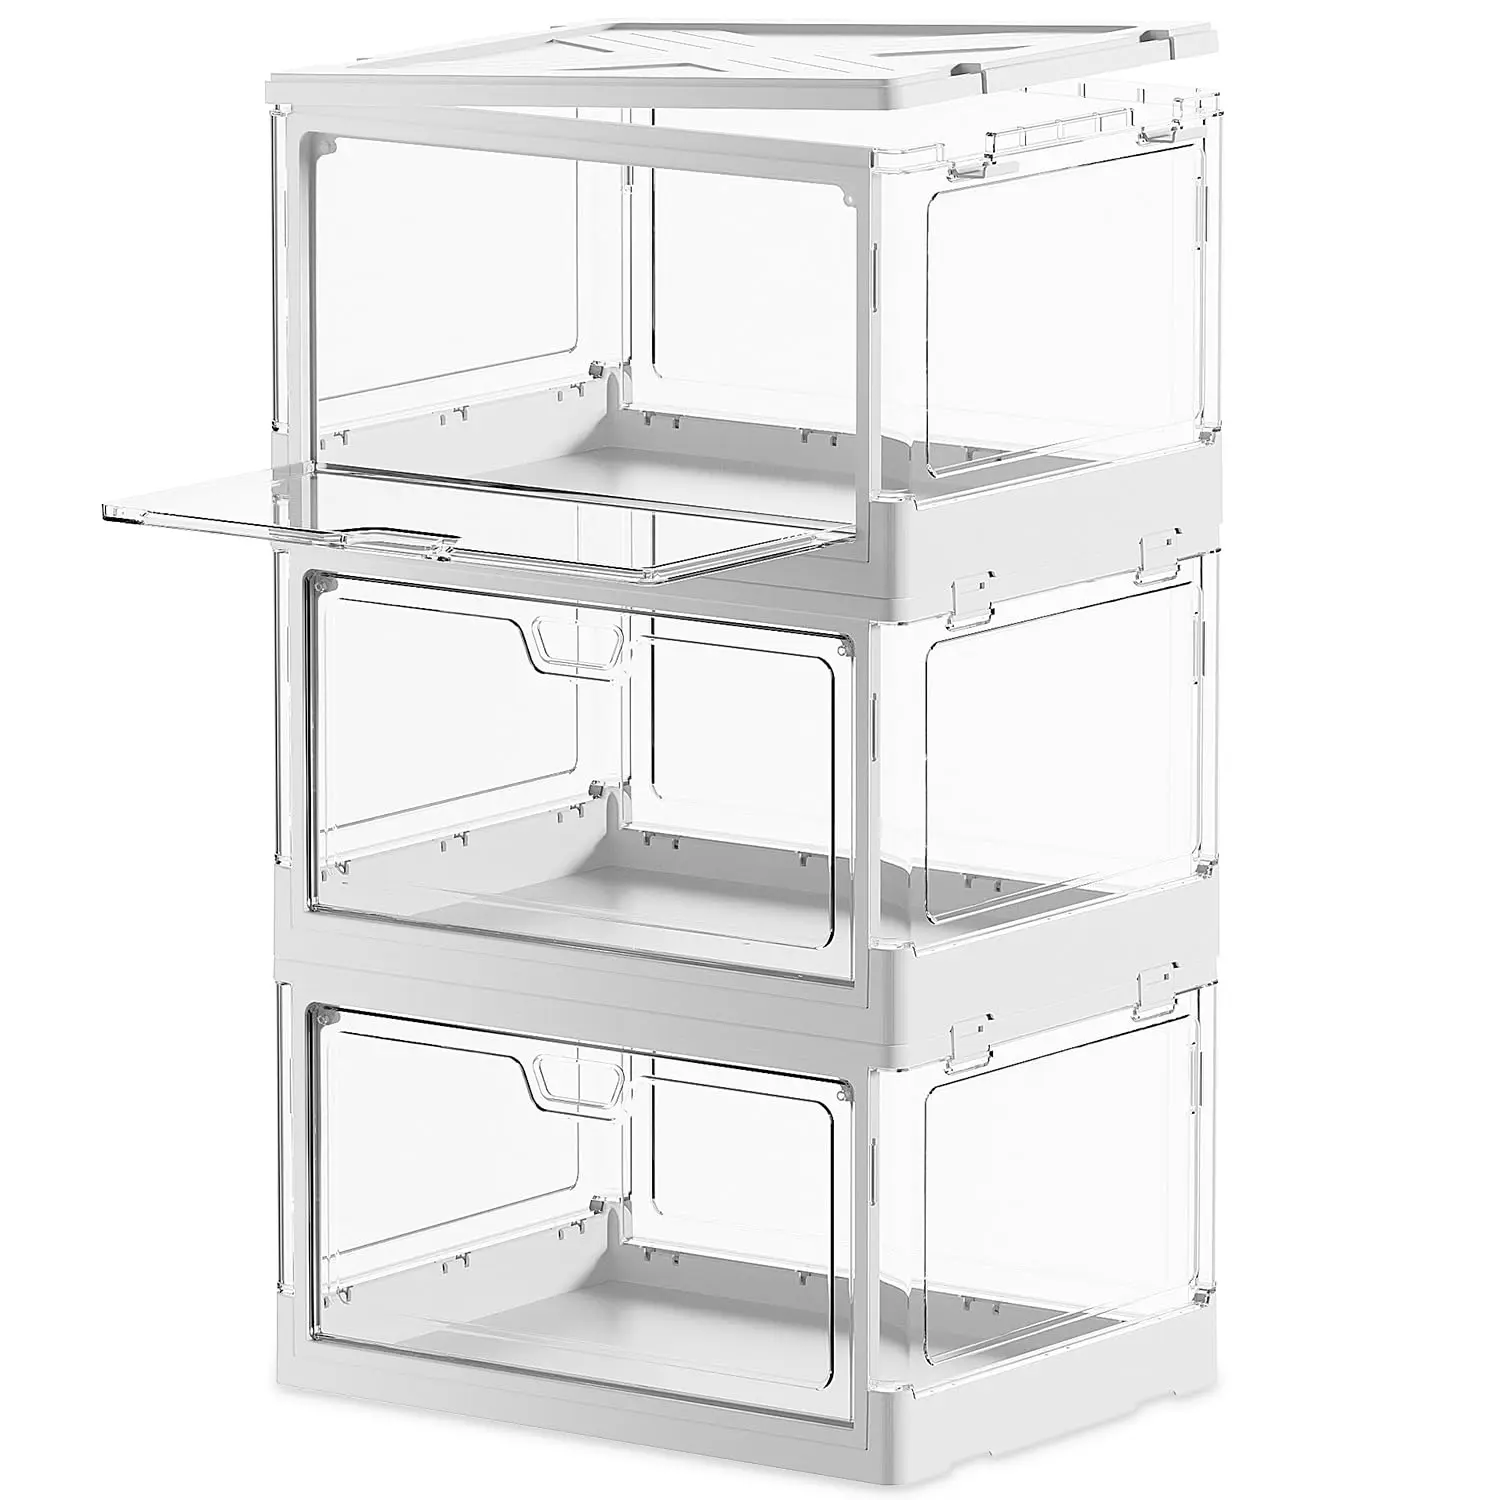 

70 Qt Plastic Collapsible Organizer Containers Boxes with Doors for Closet Living Room Bedroom - White 15x11.2x8.7 x 3-Pack